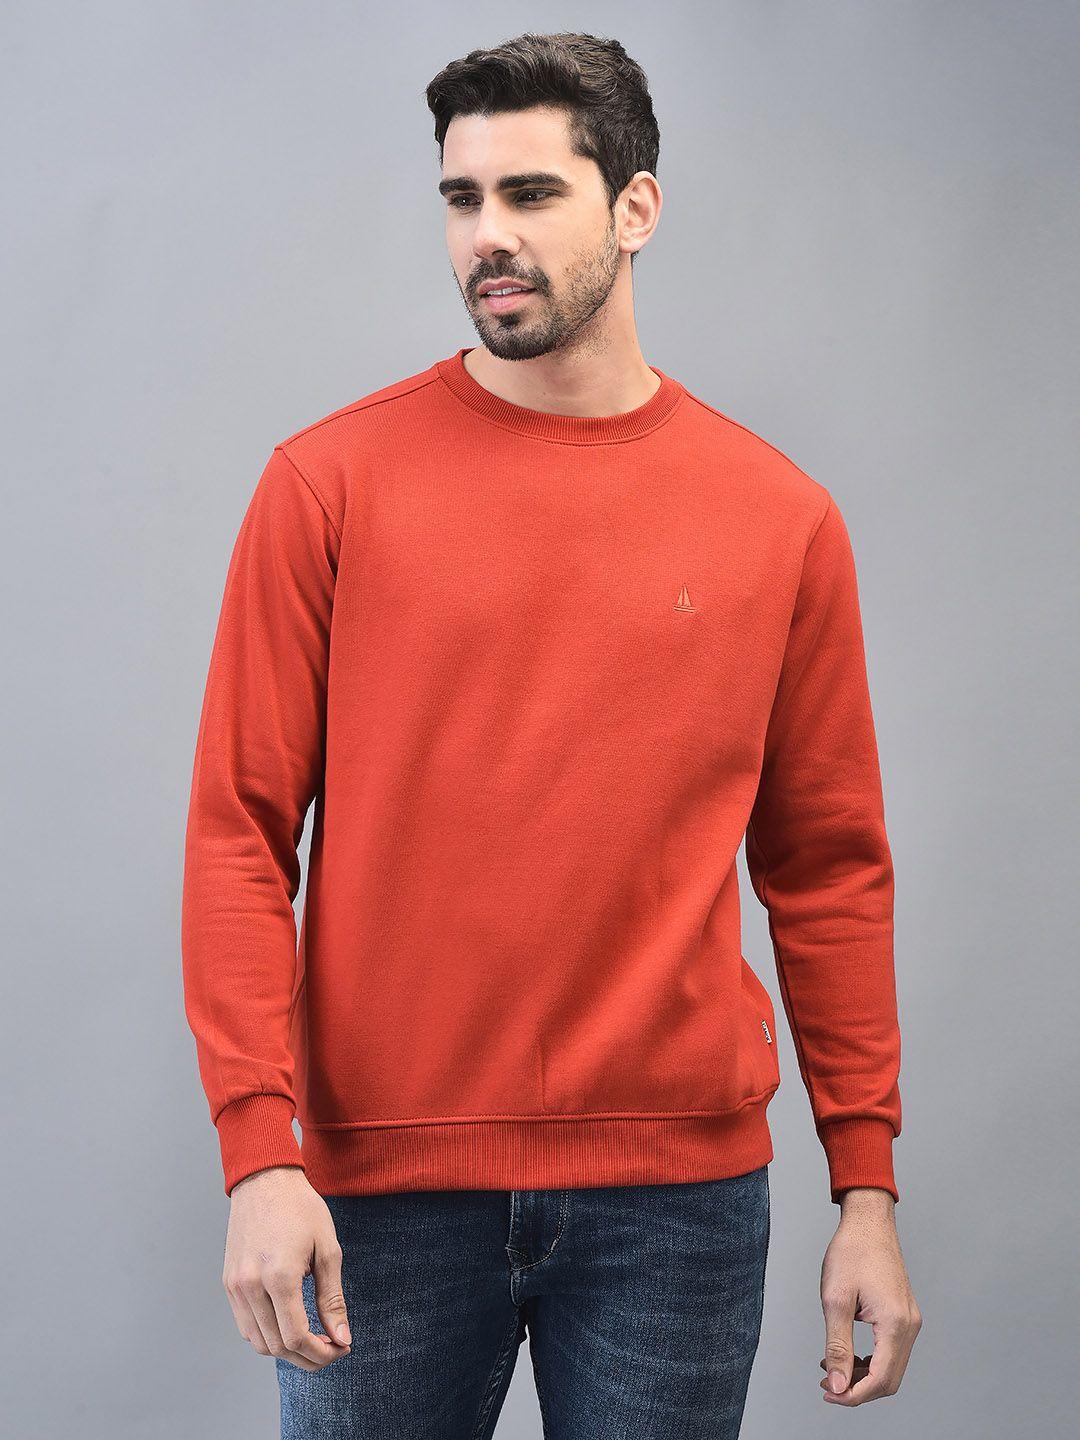 canoe pullover round neck long sleeves ribbed cotton sweatshirt